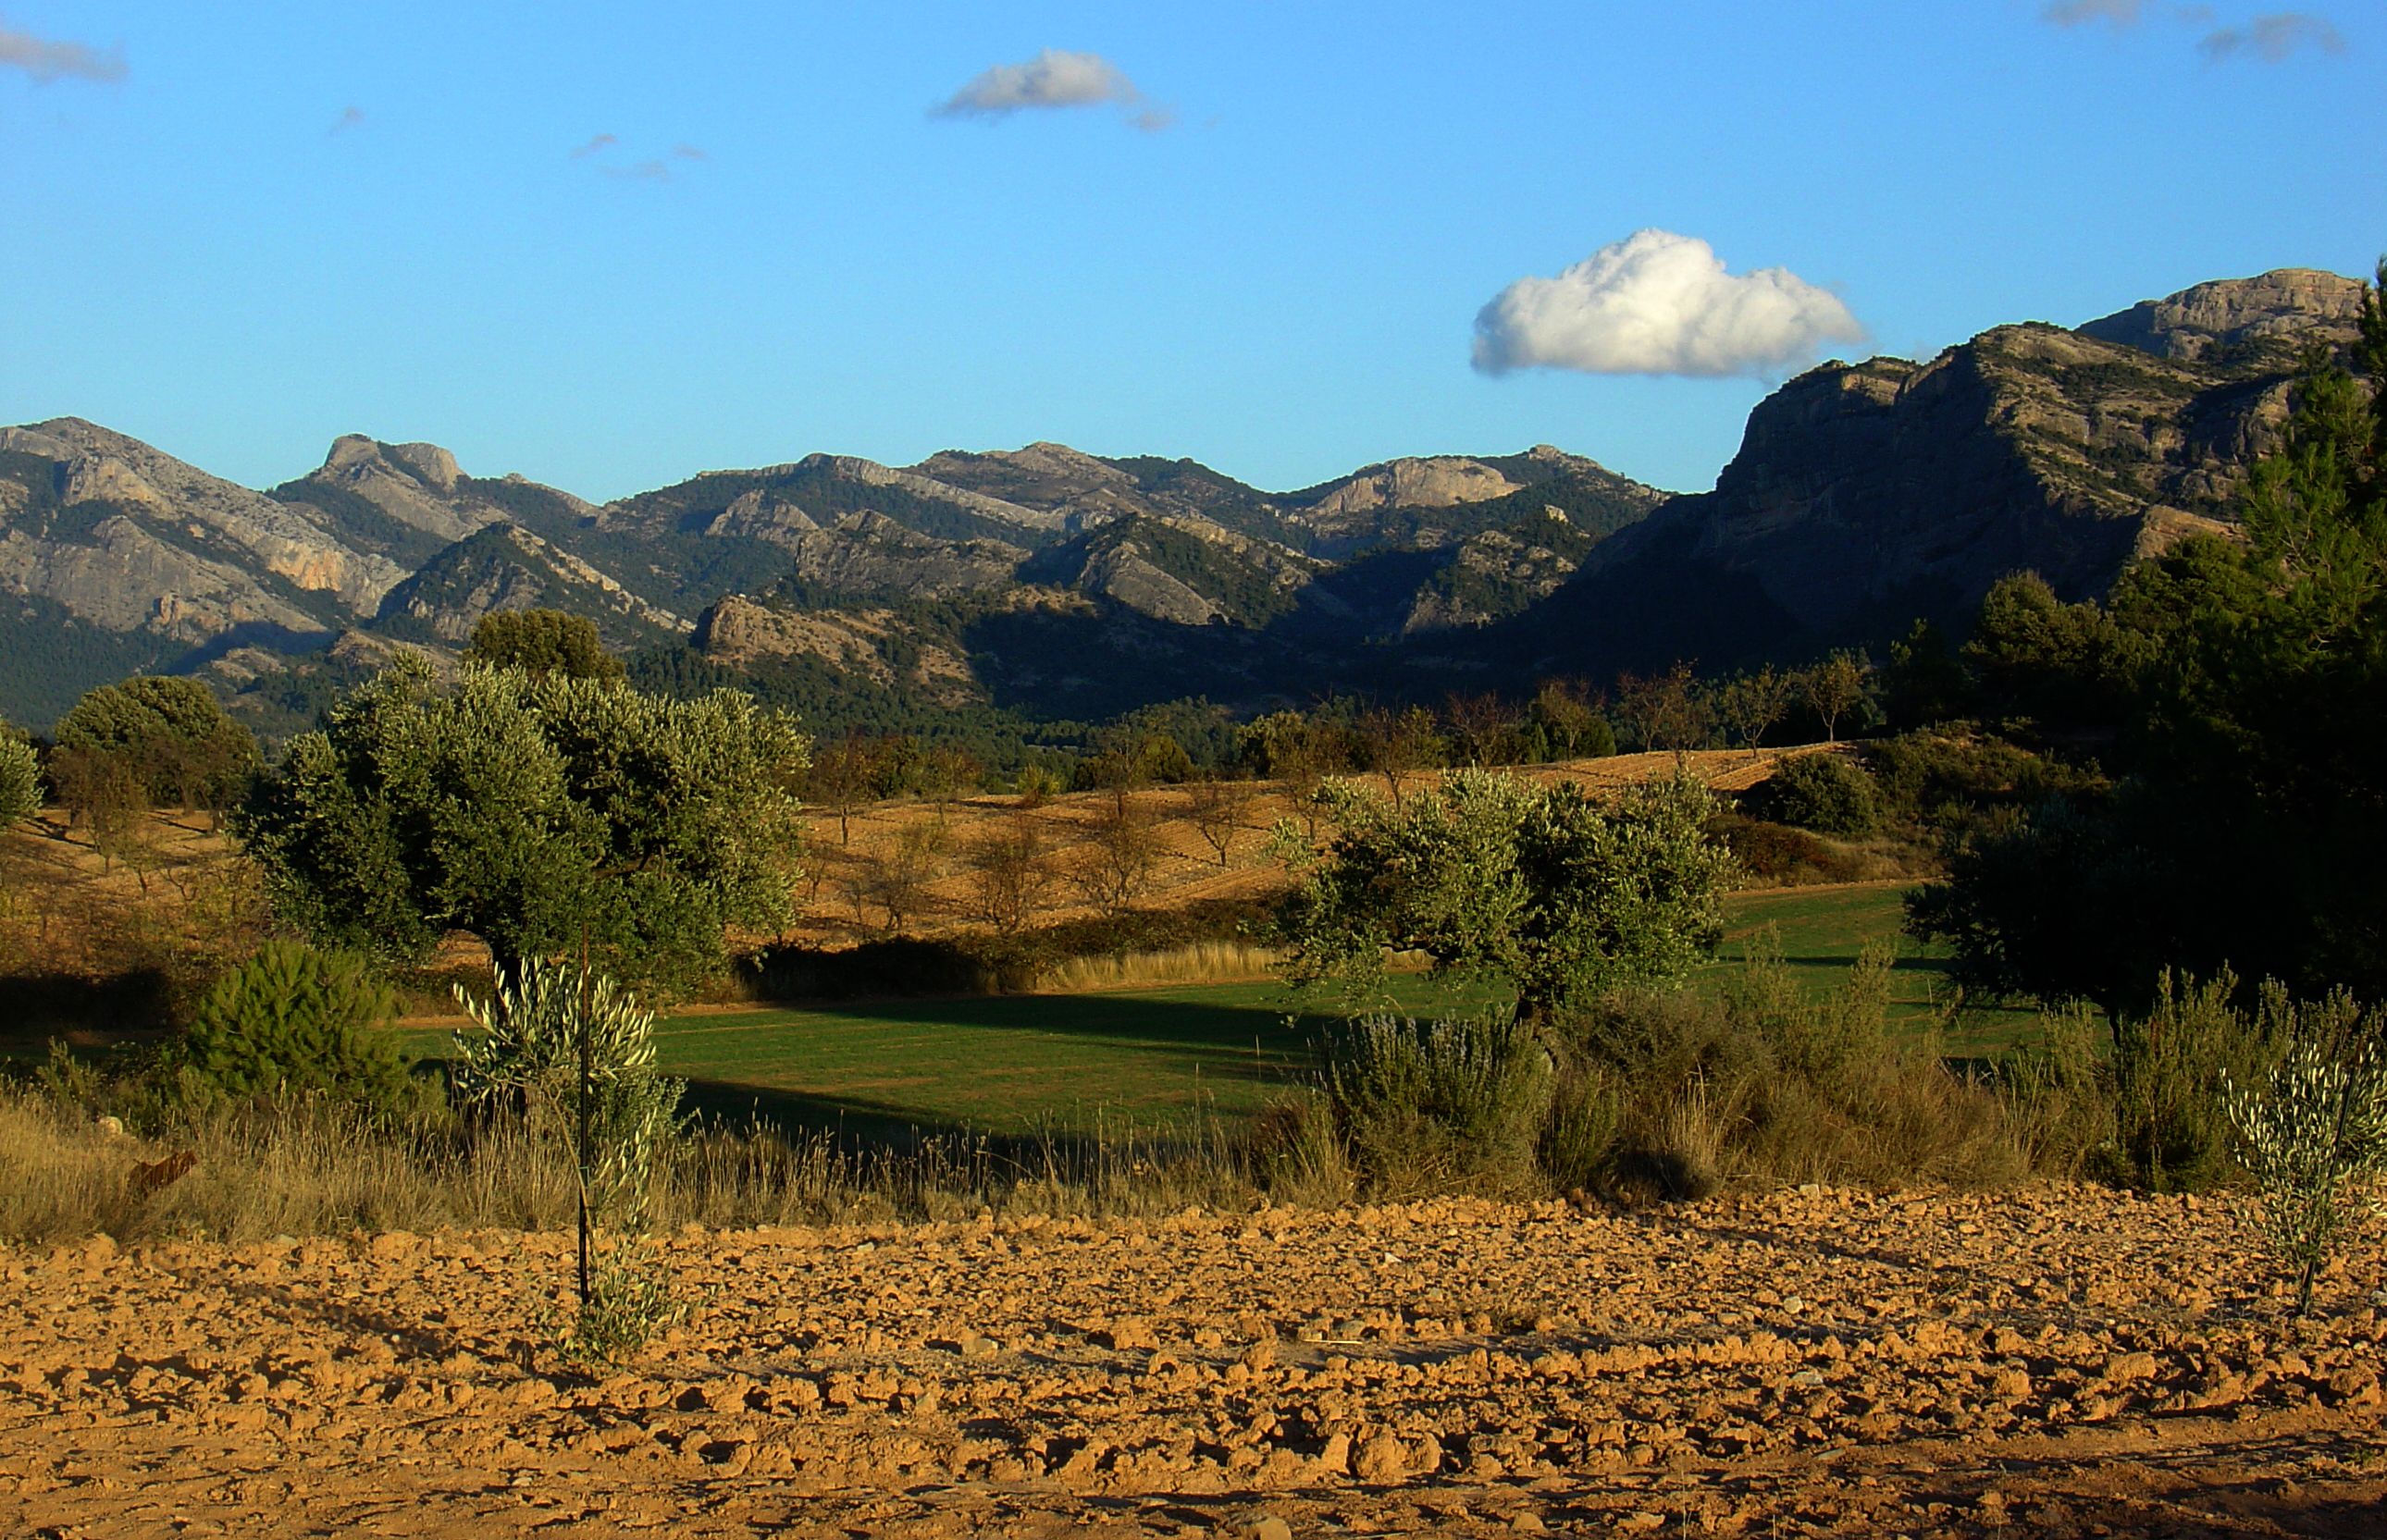 Massif Ports de Tortosa-Beseit from the plains of Arnes, by Pasdeguia